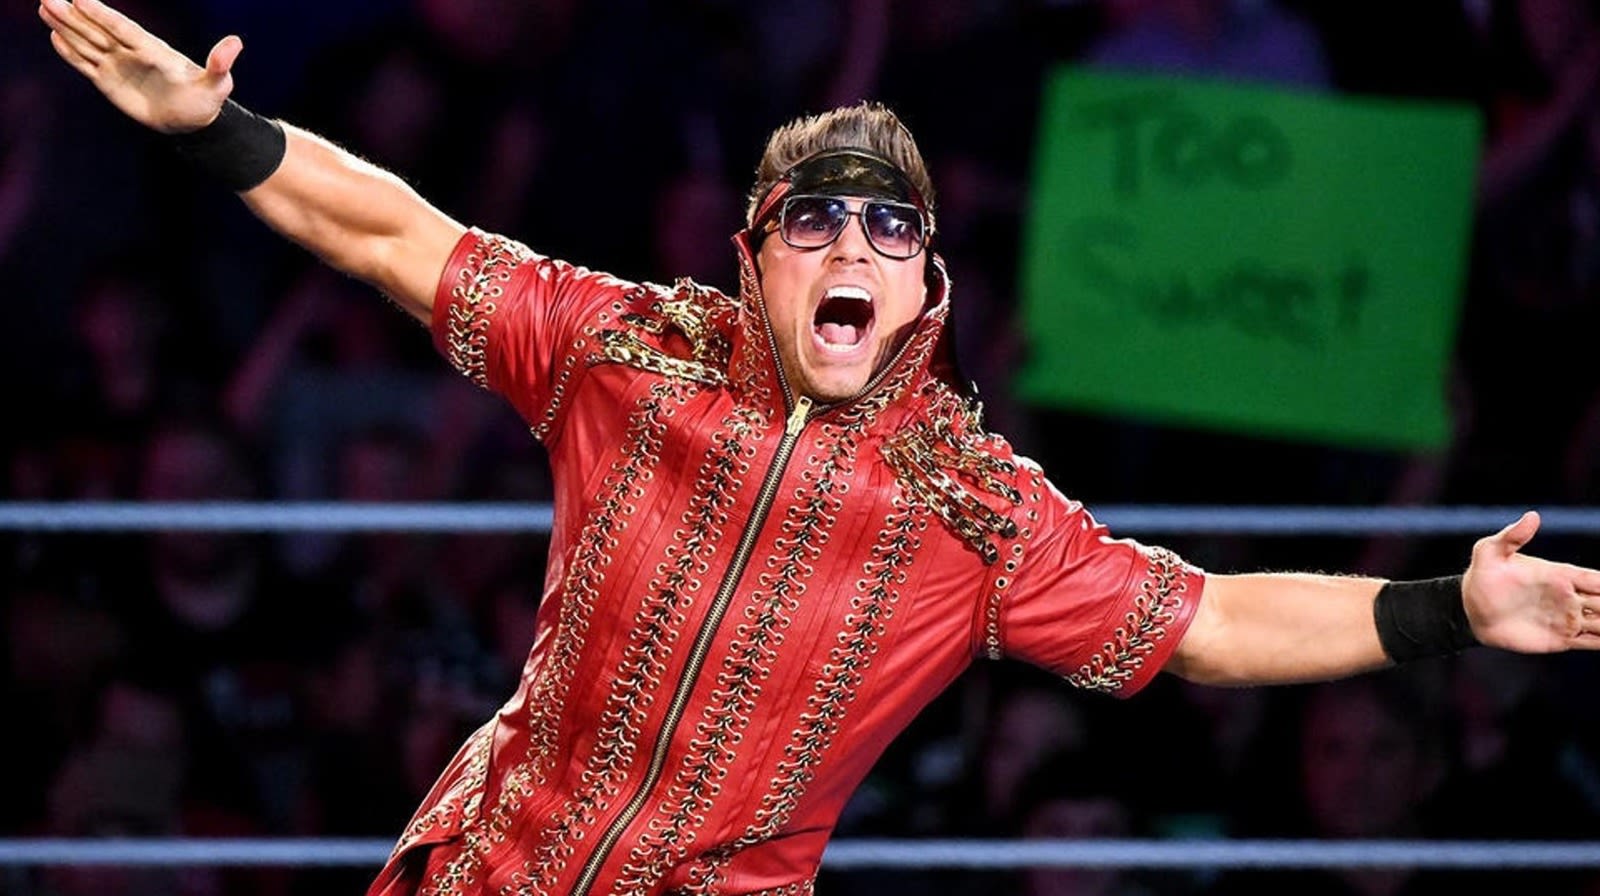 The Miz Opens Up About Learning From WWE's John Cena - Wrestling Inc.